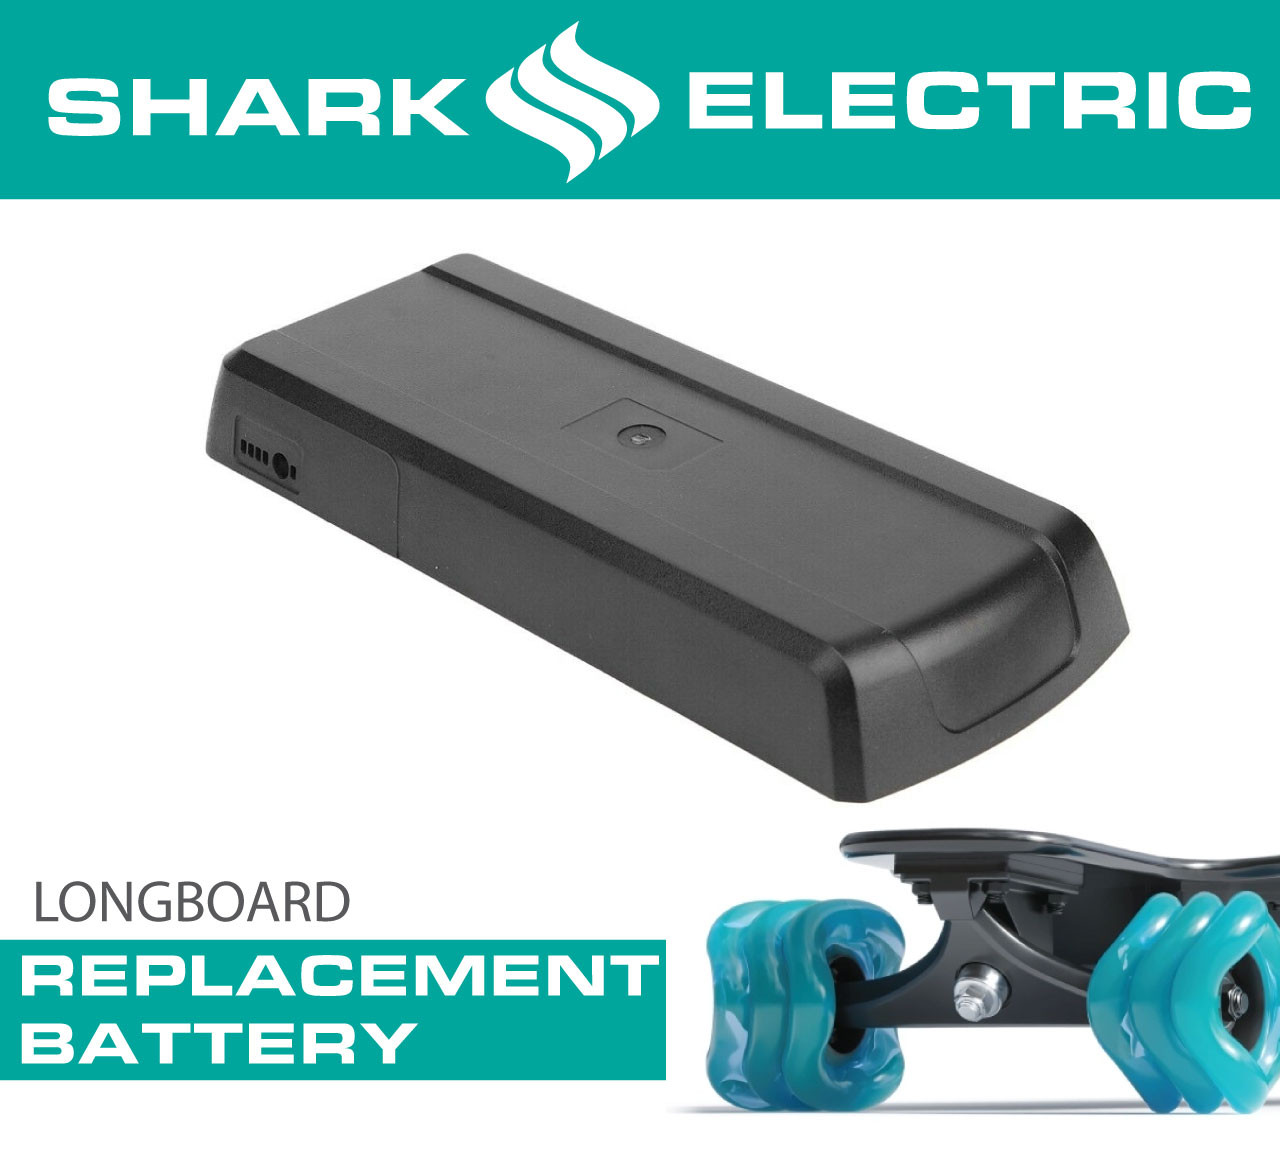 Battery Replacement for Shark Electric Recharge Longboard - Shark